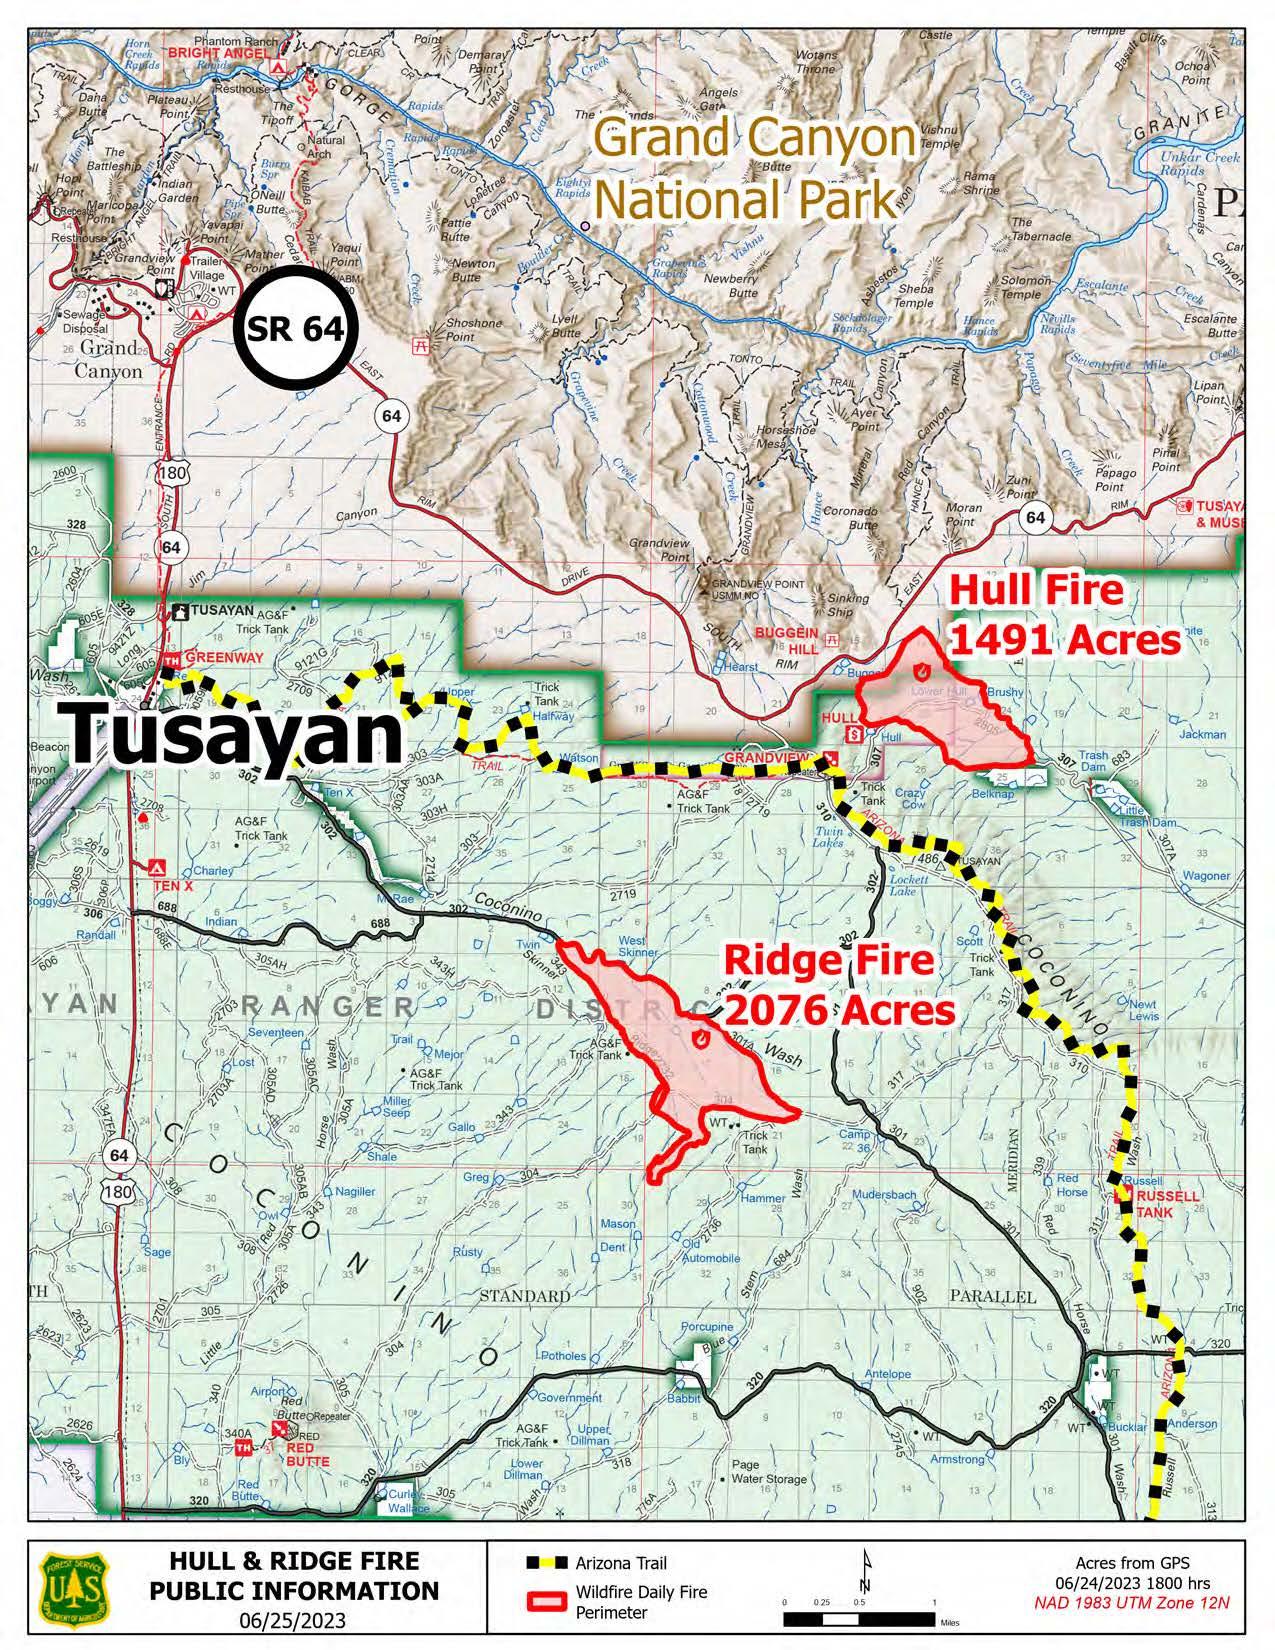 Map displaying the location of the Hull Fire and the Ridge Fire in relation to the town of Tusayan, Arizona.